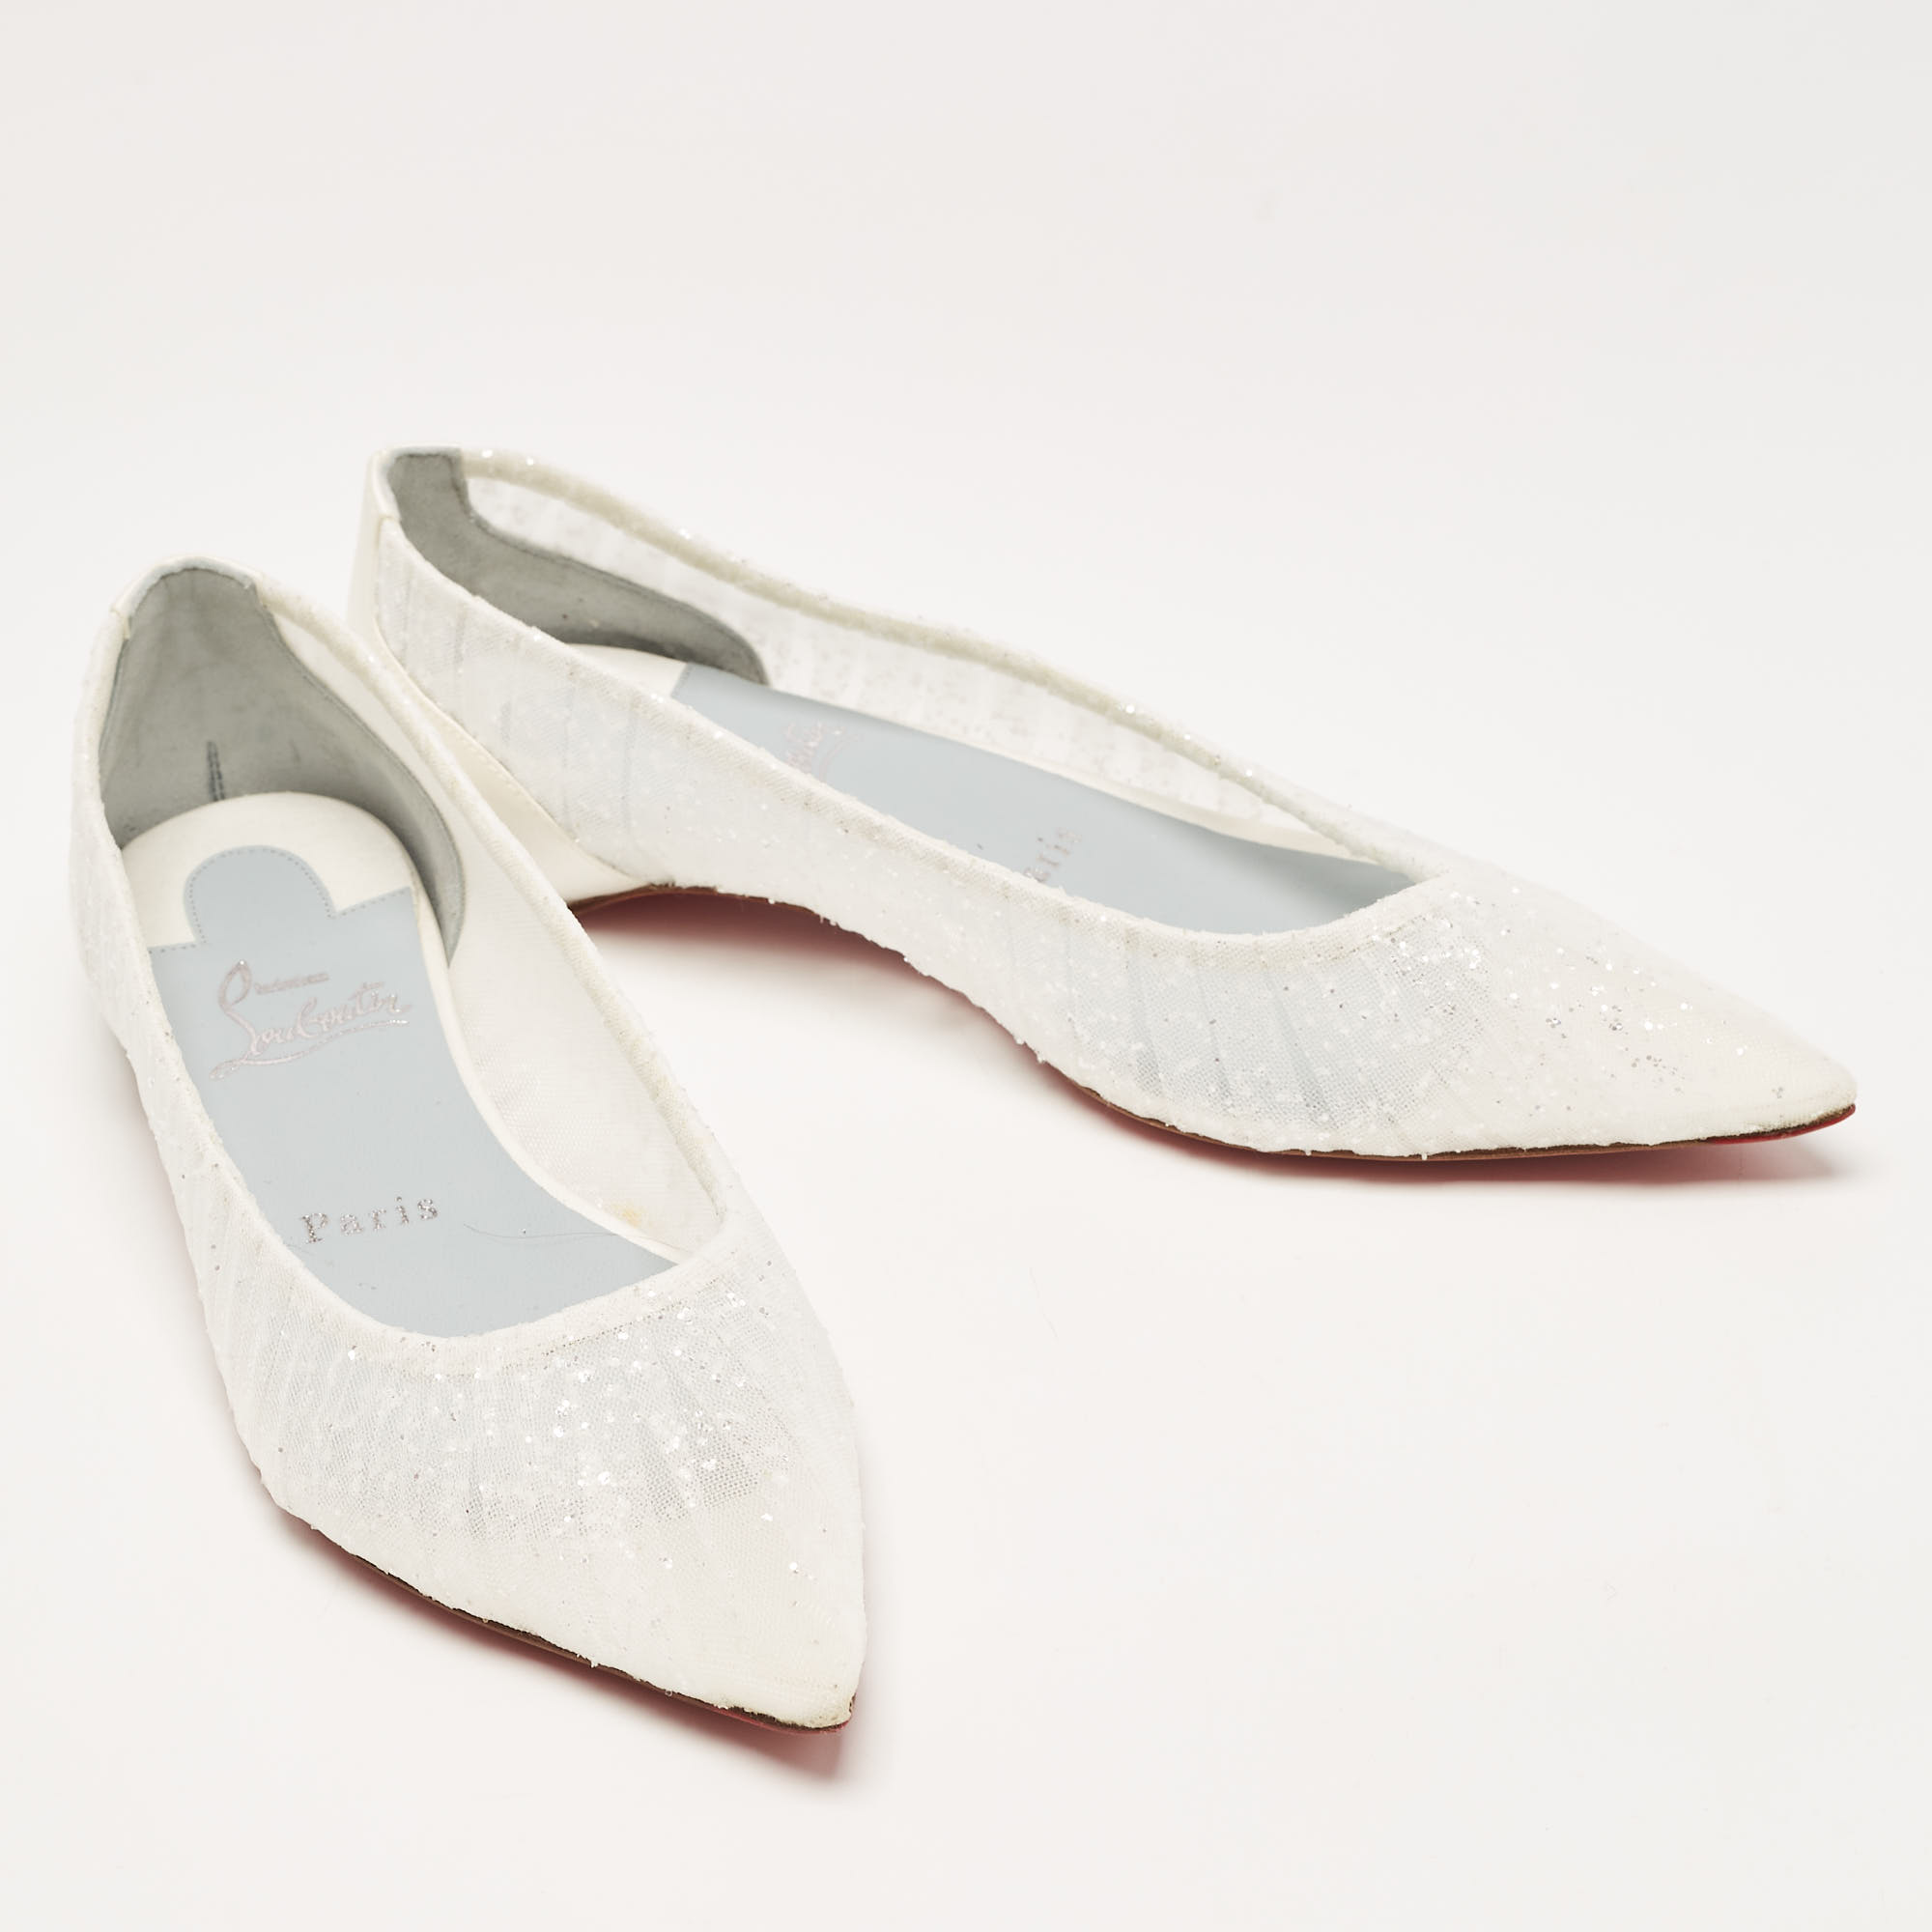 Christian Louboutin White Glitter Tulle Fabric And Satin Kate Ballet Flats Size 36.5